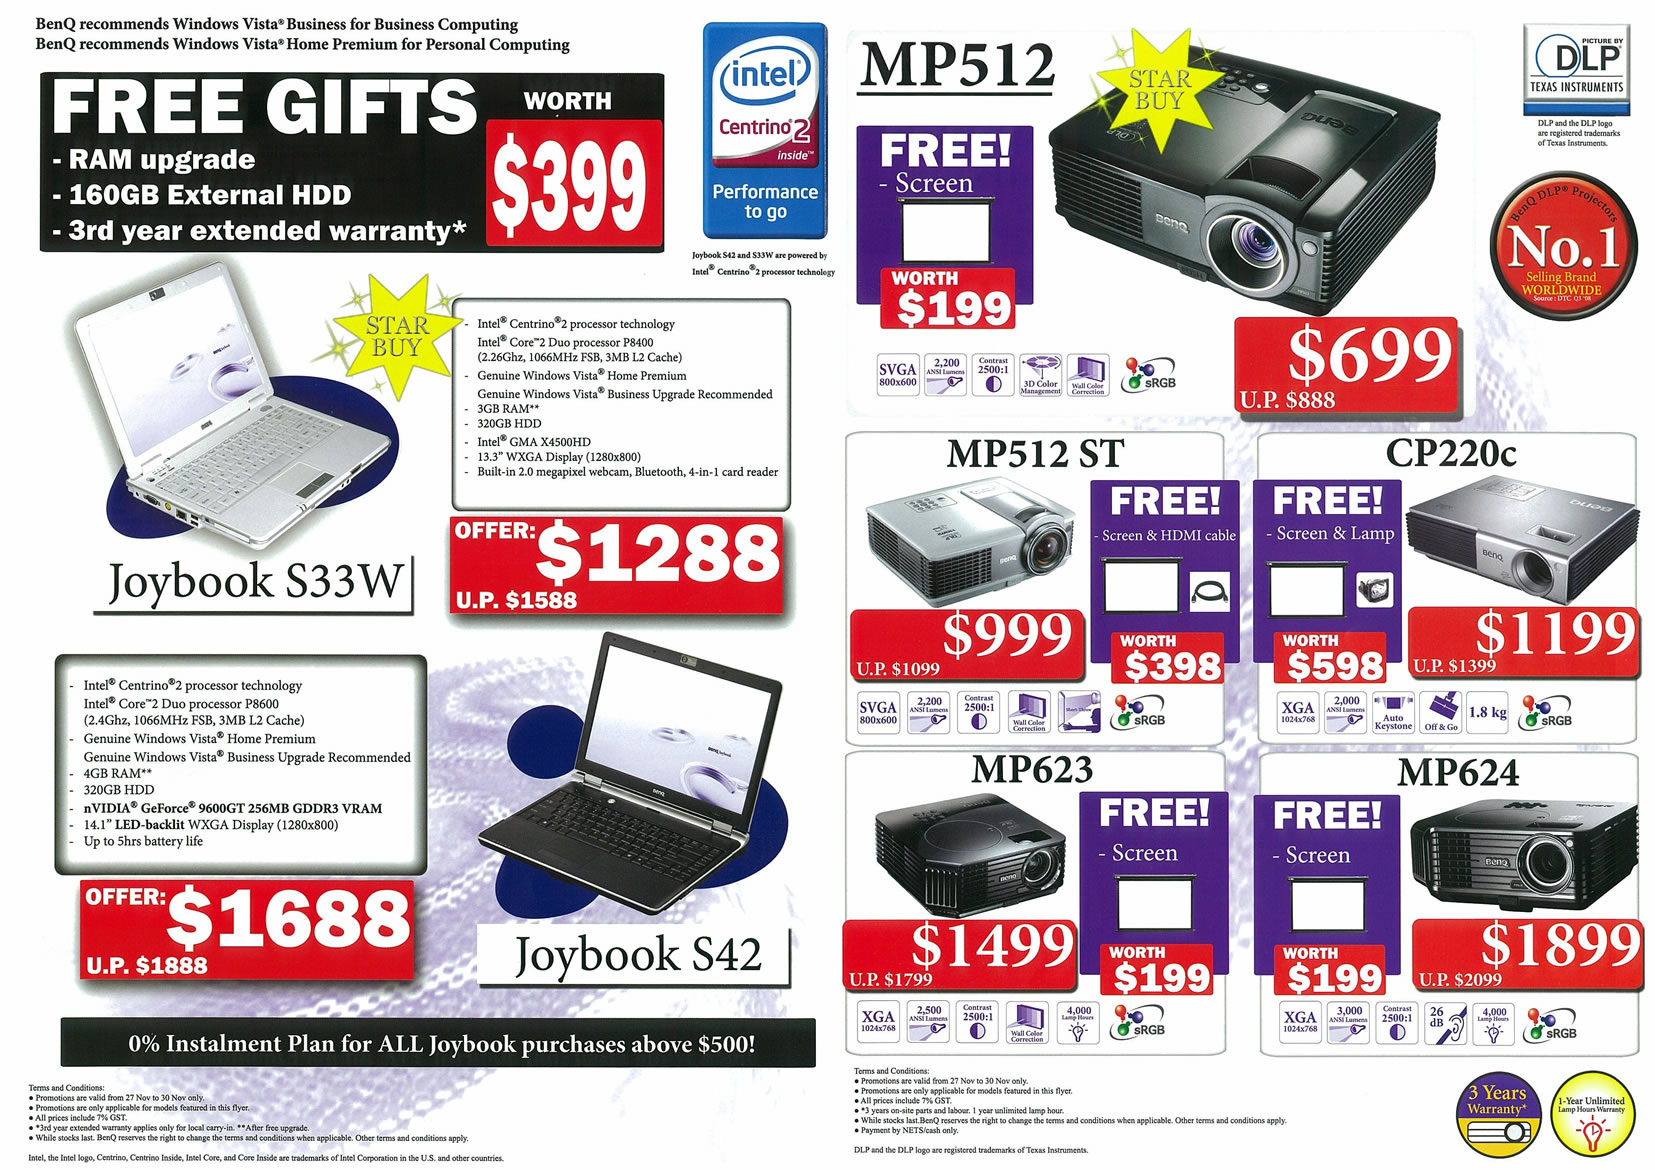 Sitex 2008 price list image brochure of BenQ Notebooks Projectors Page 2 - Vr-zone Tclong